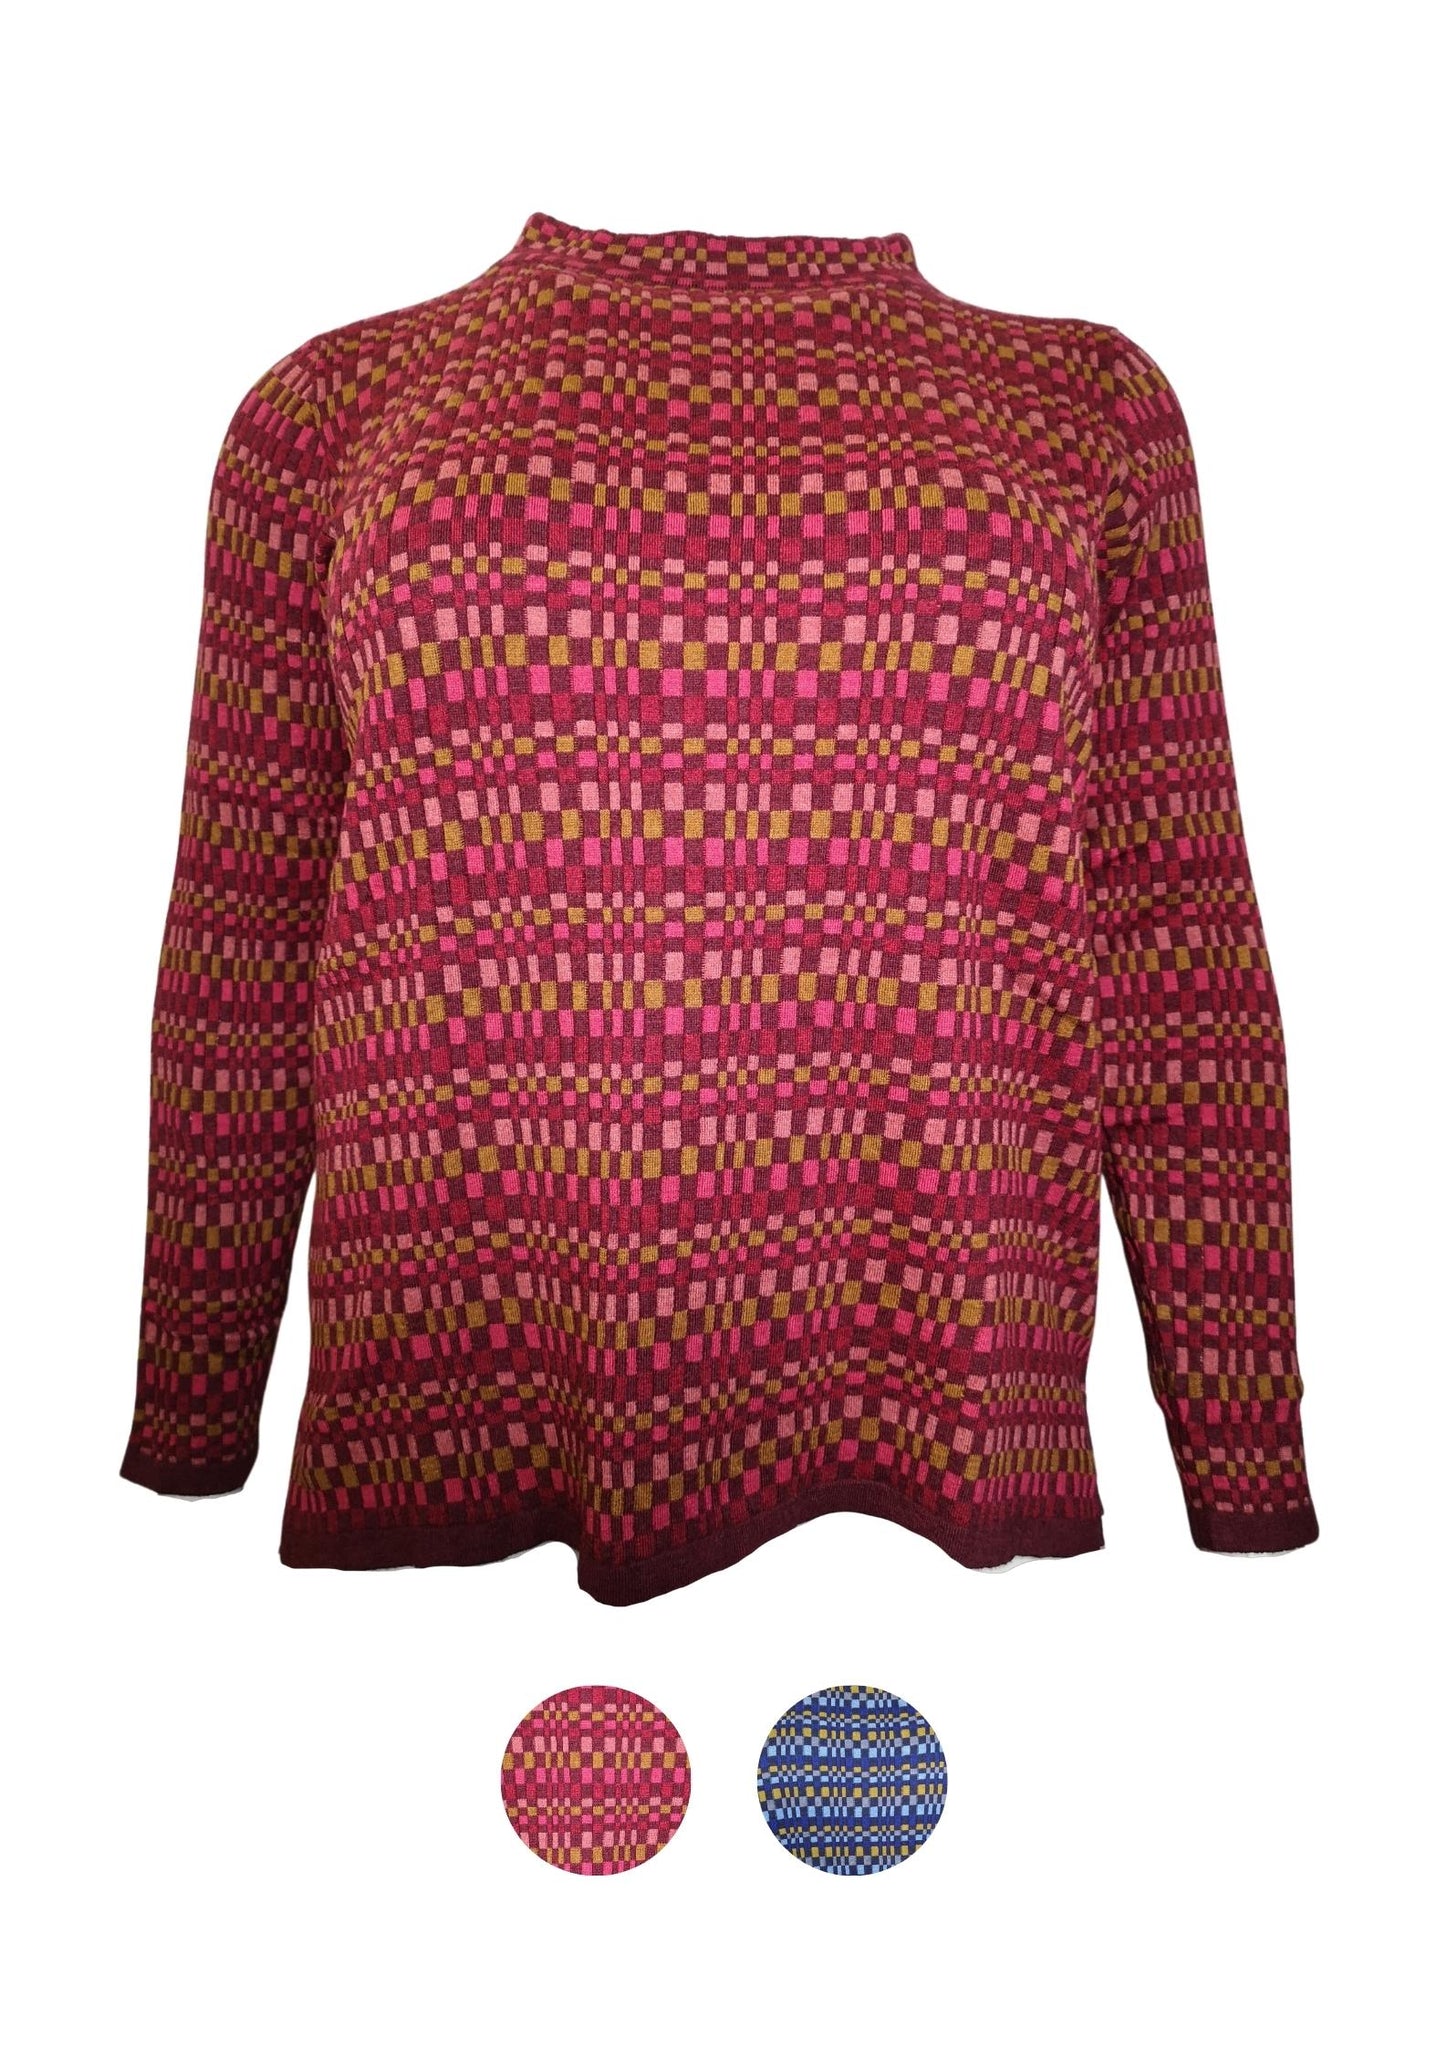 *MANSTED _ Pullover DIANA Ruby Check